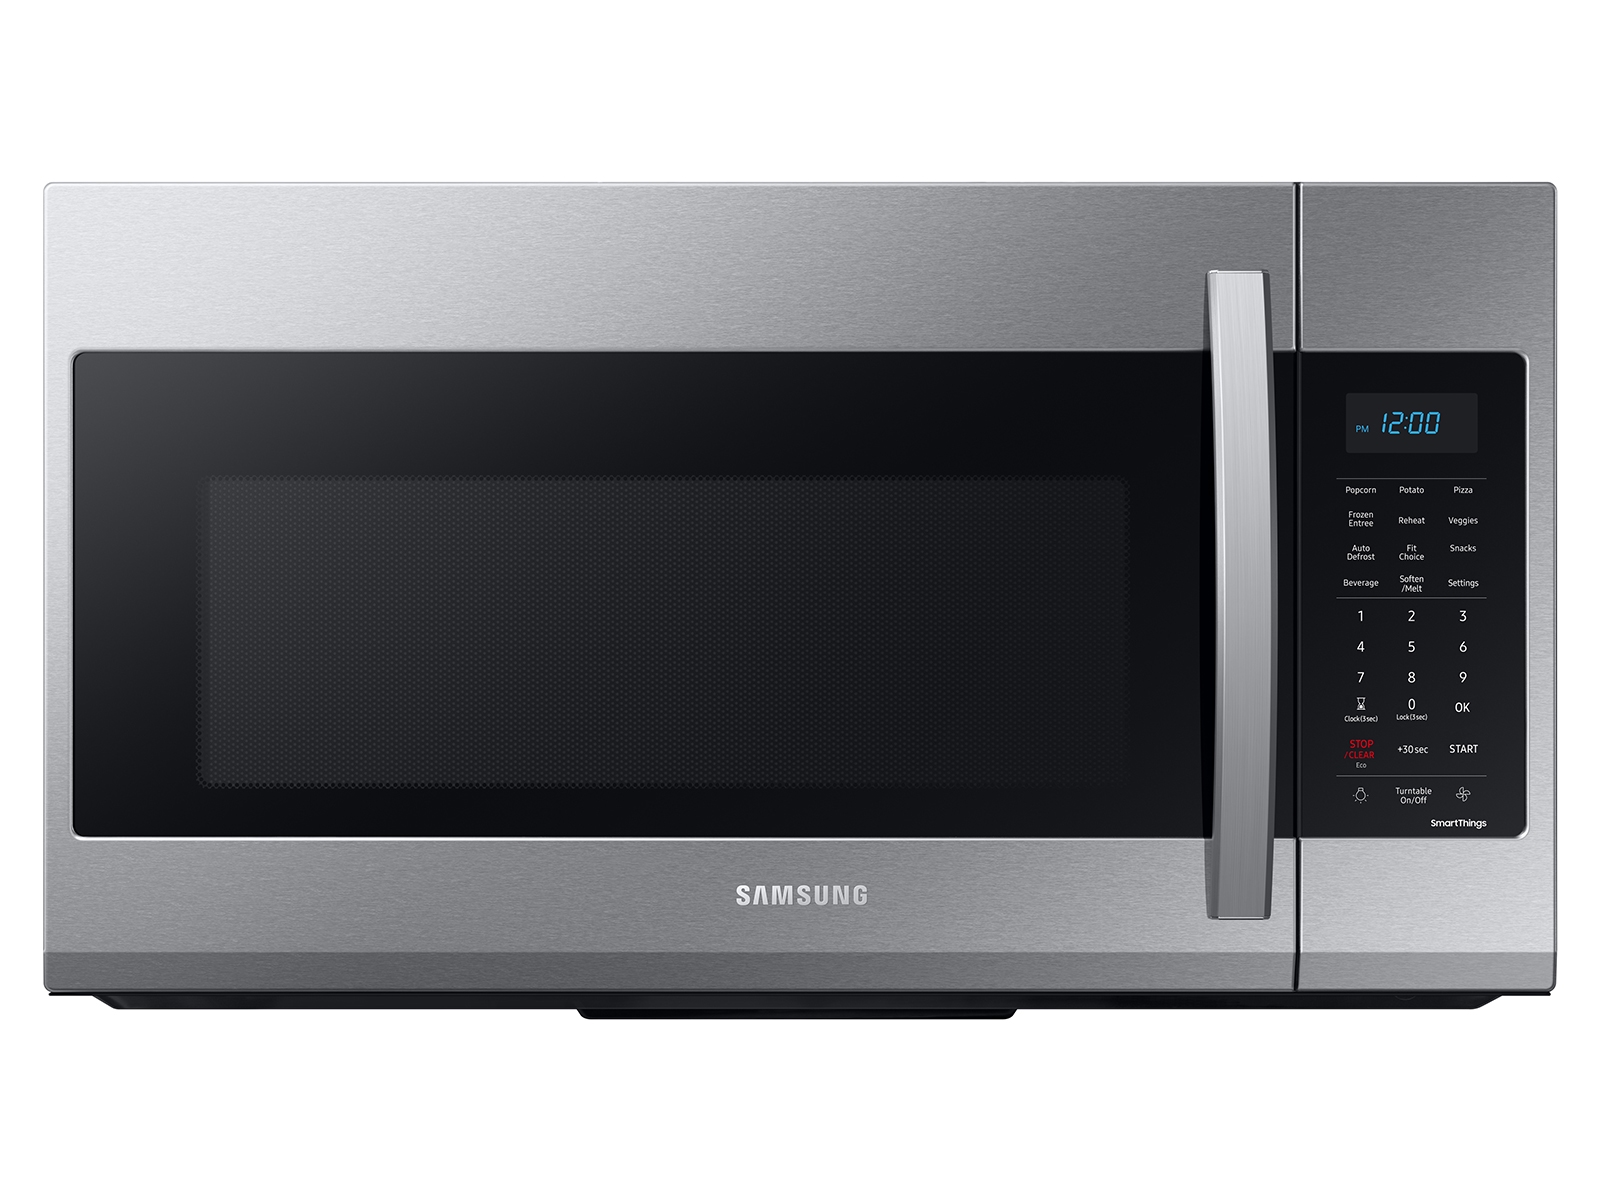 Samsung 1.9 cu. ft. Smart Over-the-Range Microwave with Wi-Fi and Sensor Cook in Stainless Steel(ME19A7041WS/AA)